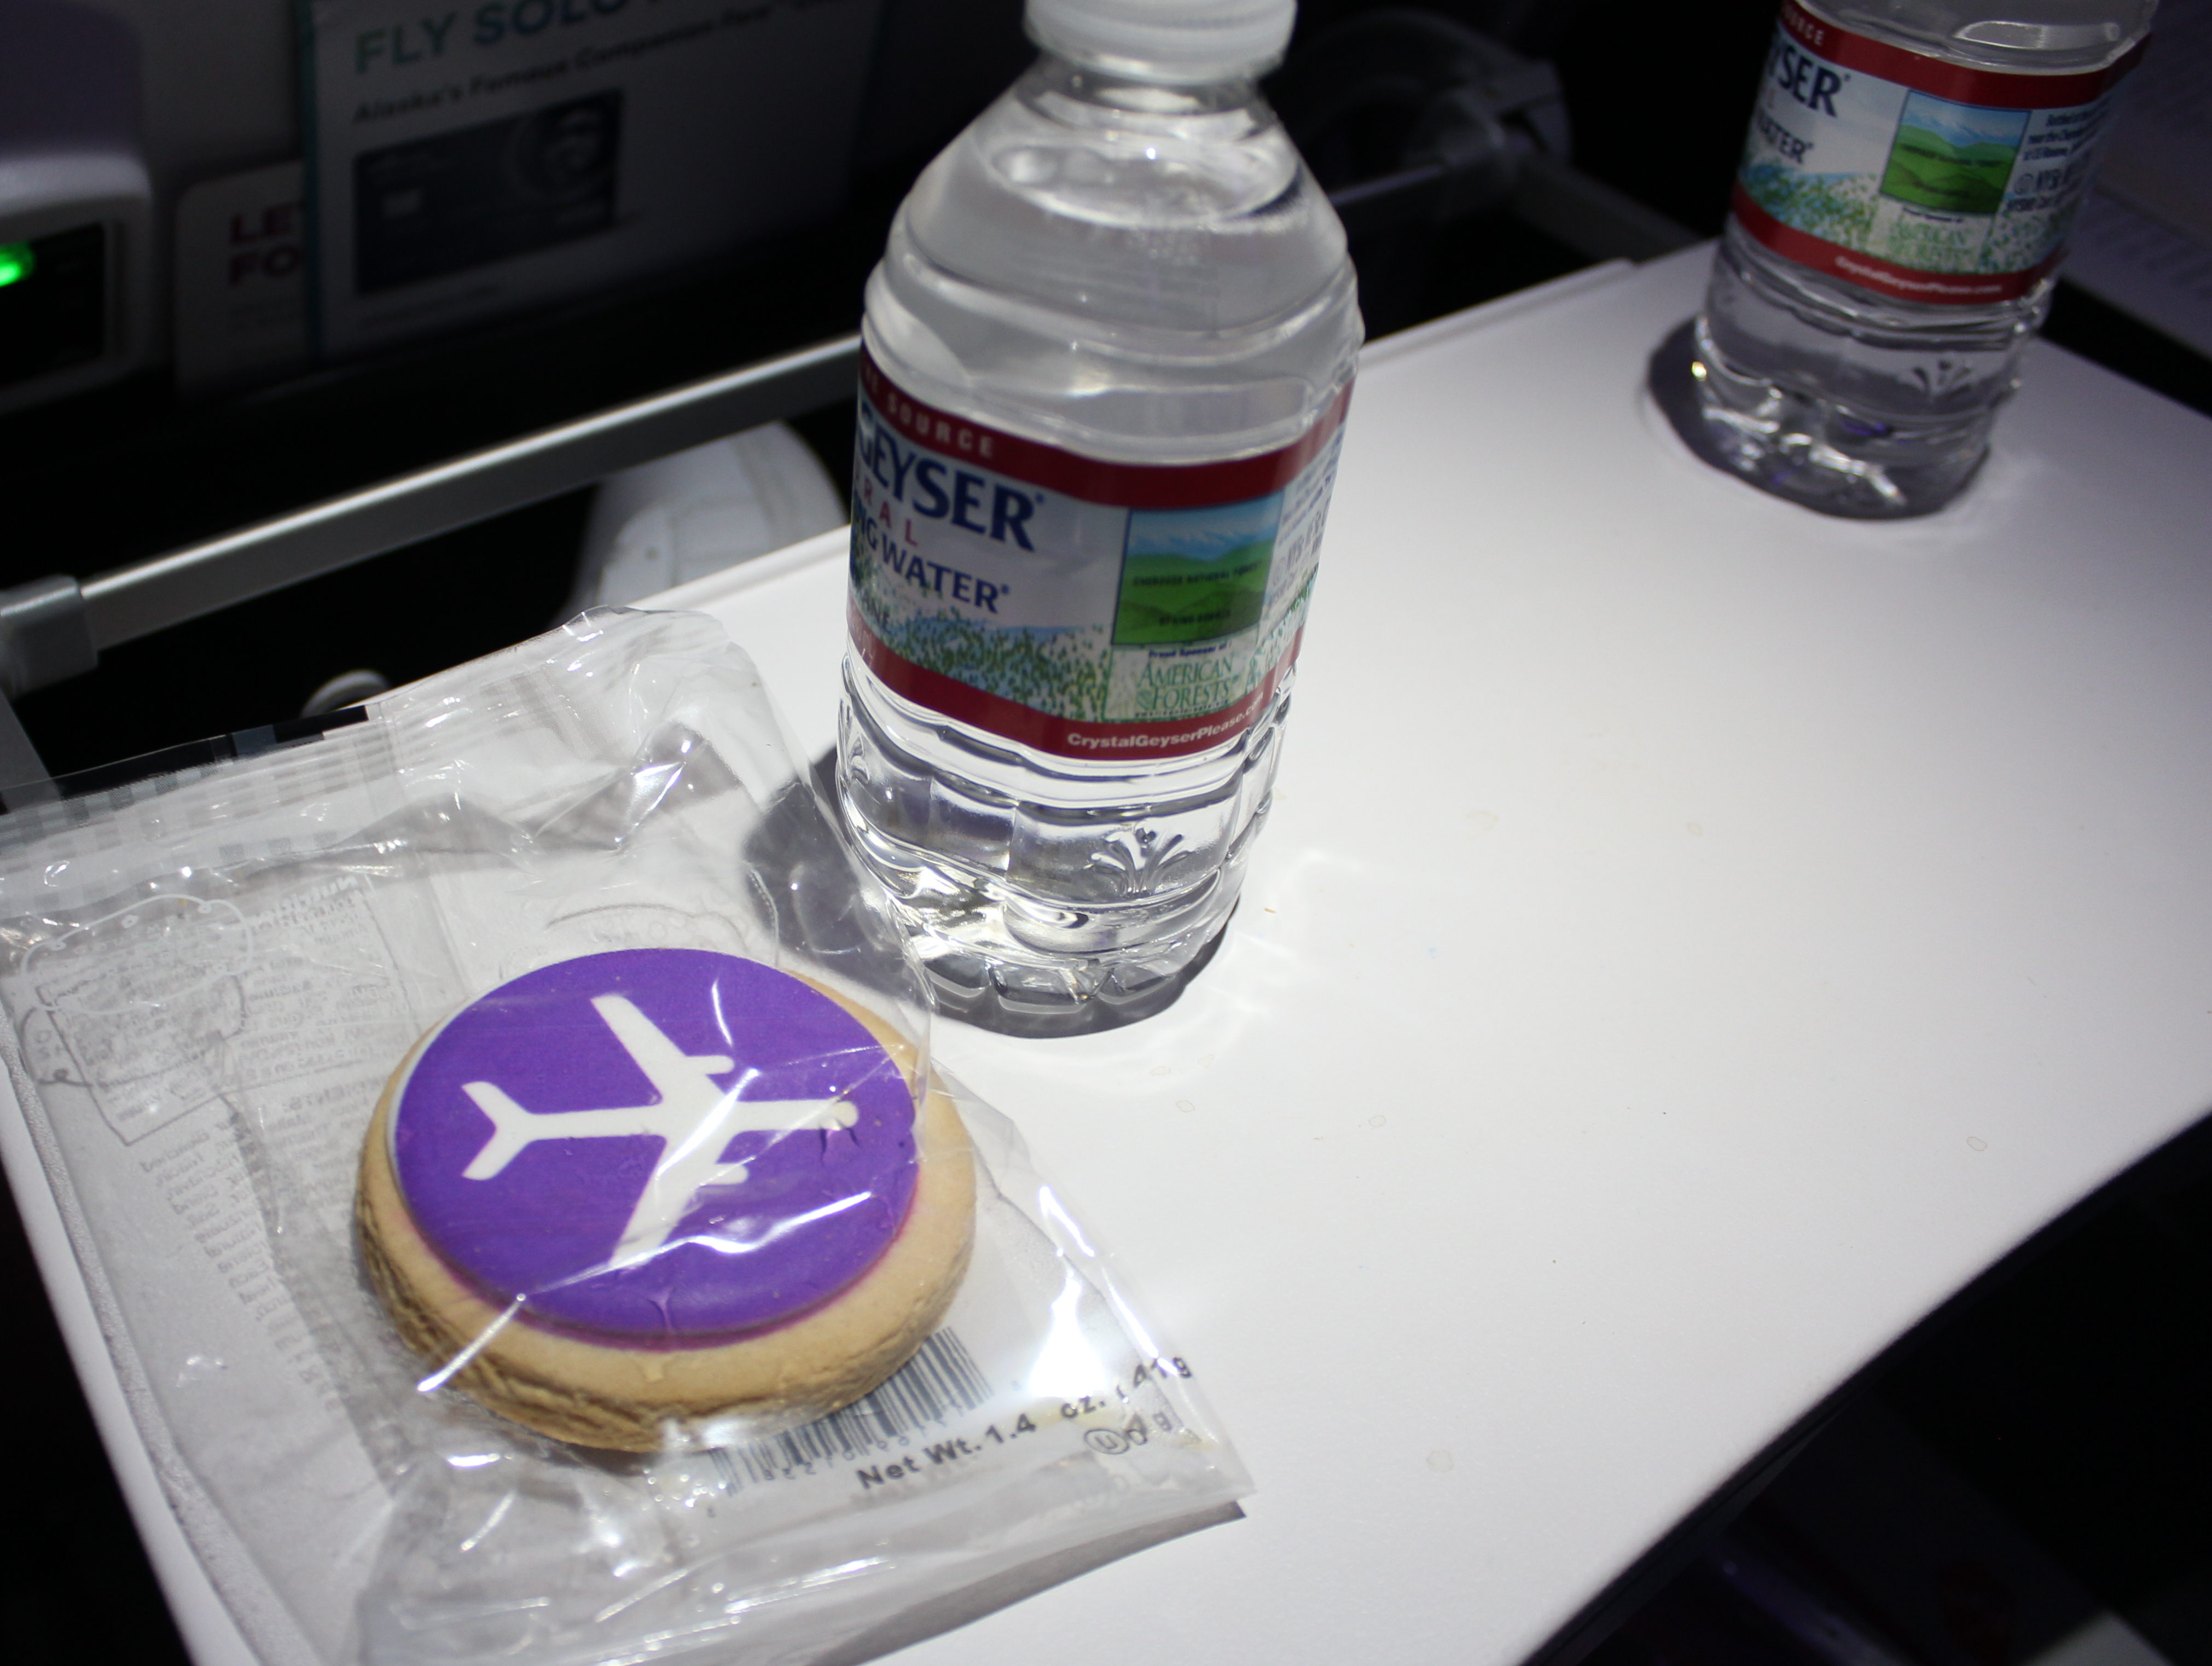 a bottle of water and a cookie